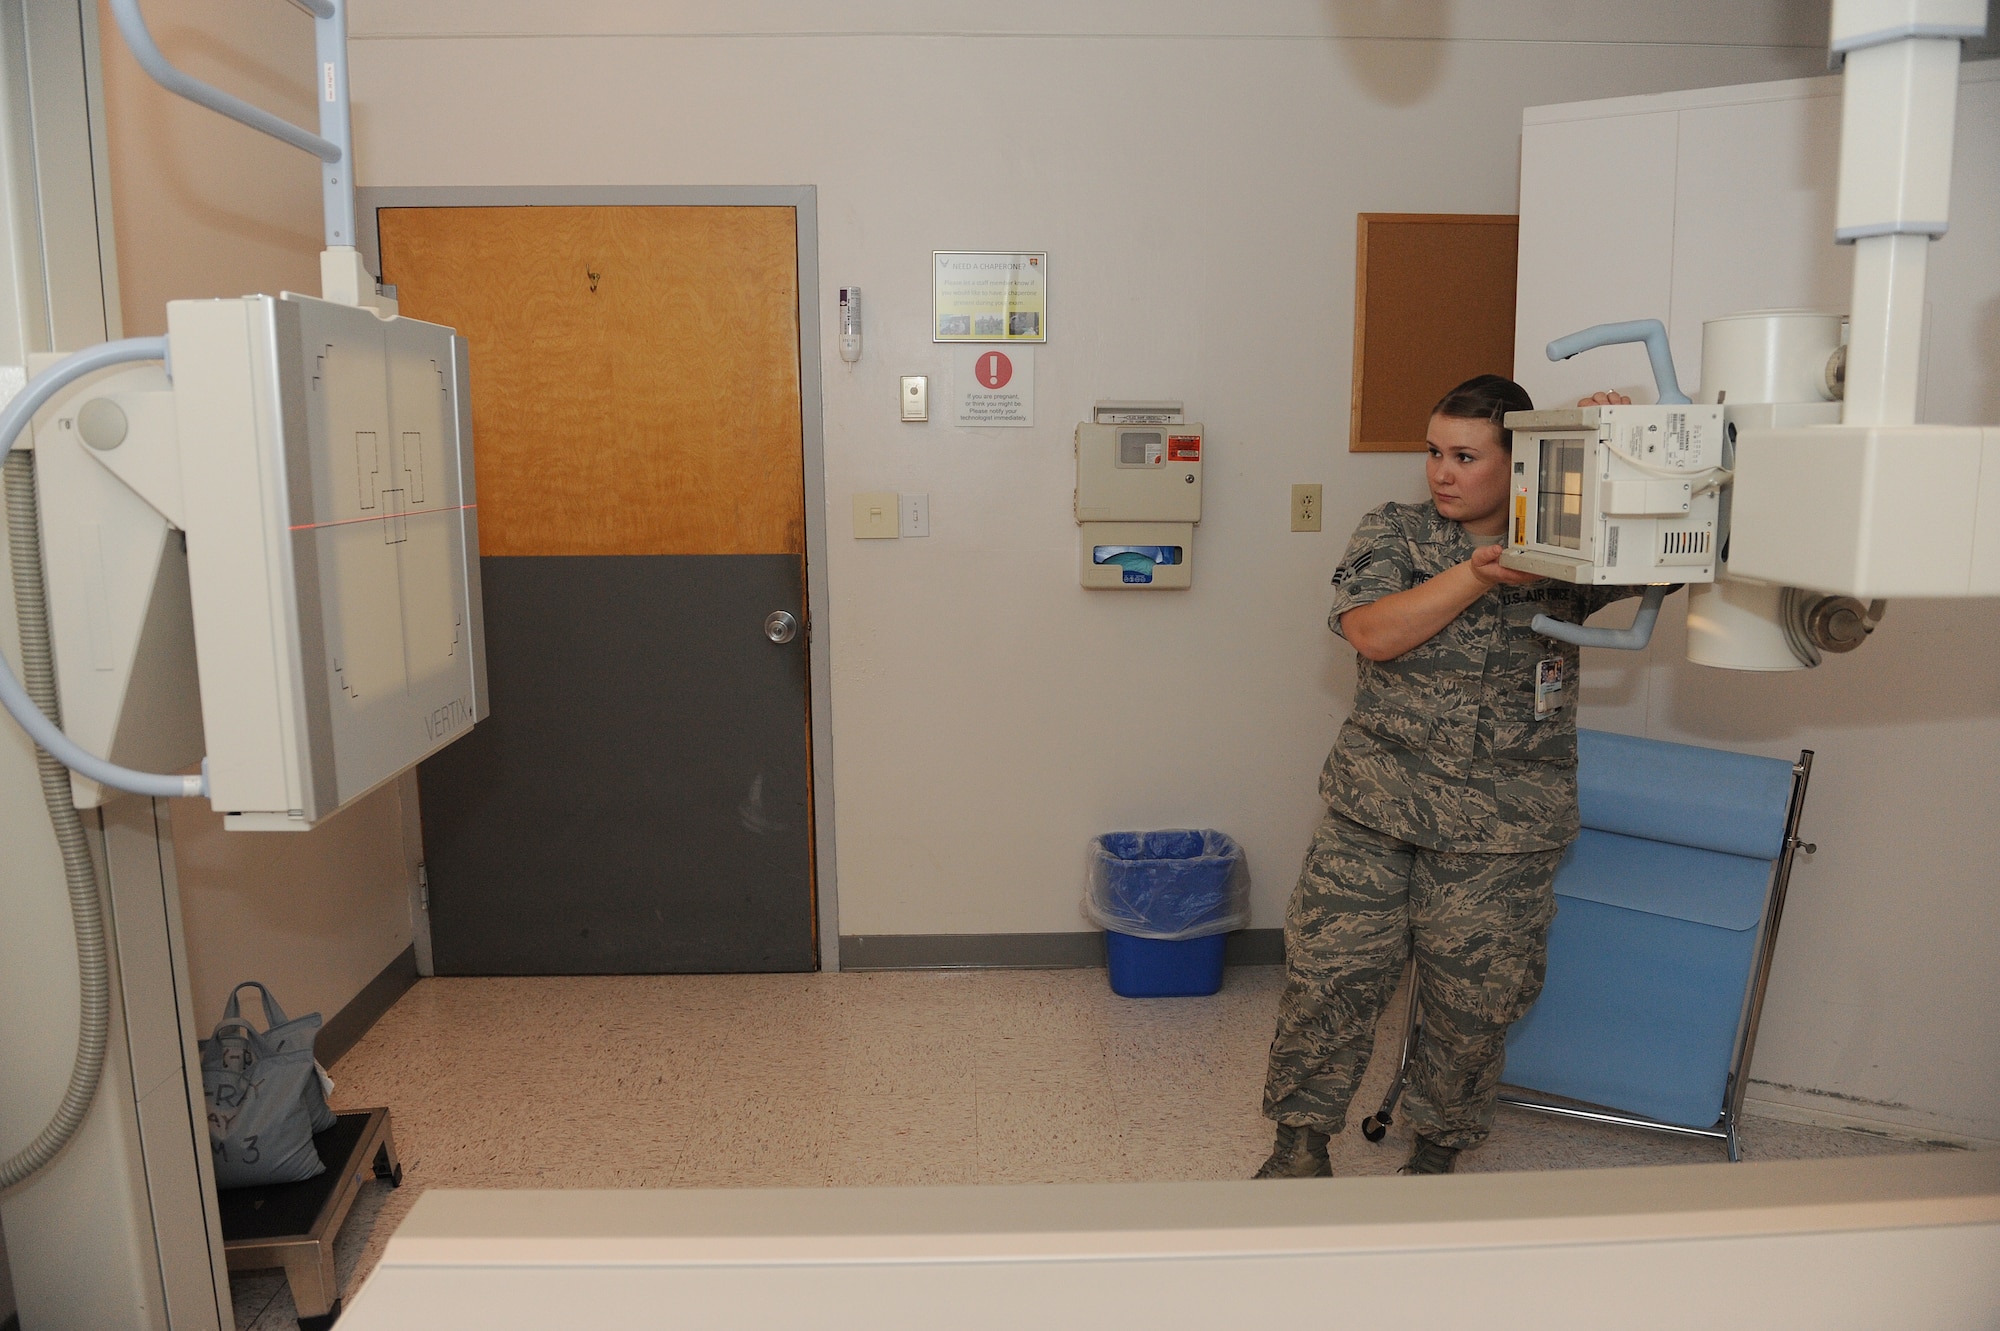 Senior Airman Casey Burch positions an X-ray tube to align with the wall bucky at Scott Air Force Base, Ill., June 3, 2014.  The tube moves up and down to coincide with a patient’s anatomy for each specific exam, including chest X-rays.  Burch is a 375th Medical Support Squadron radiology technologist.  (U.S. Air Force photo by Staff Sgt. Maria Bowman)